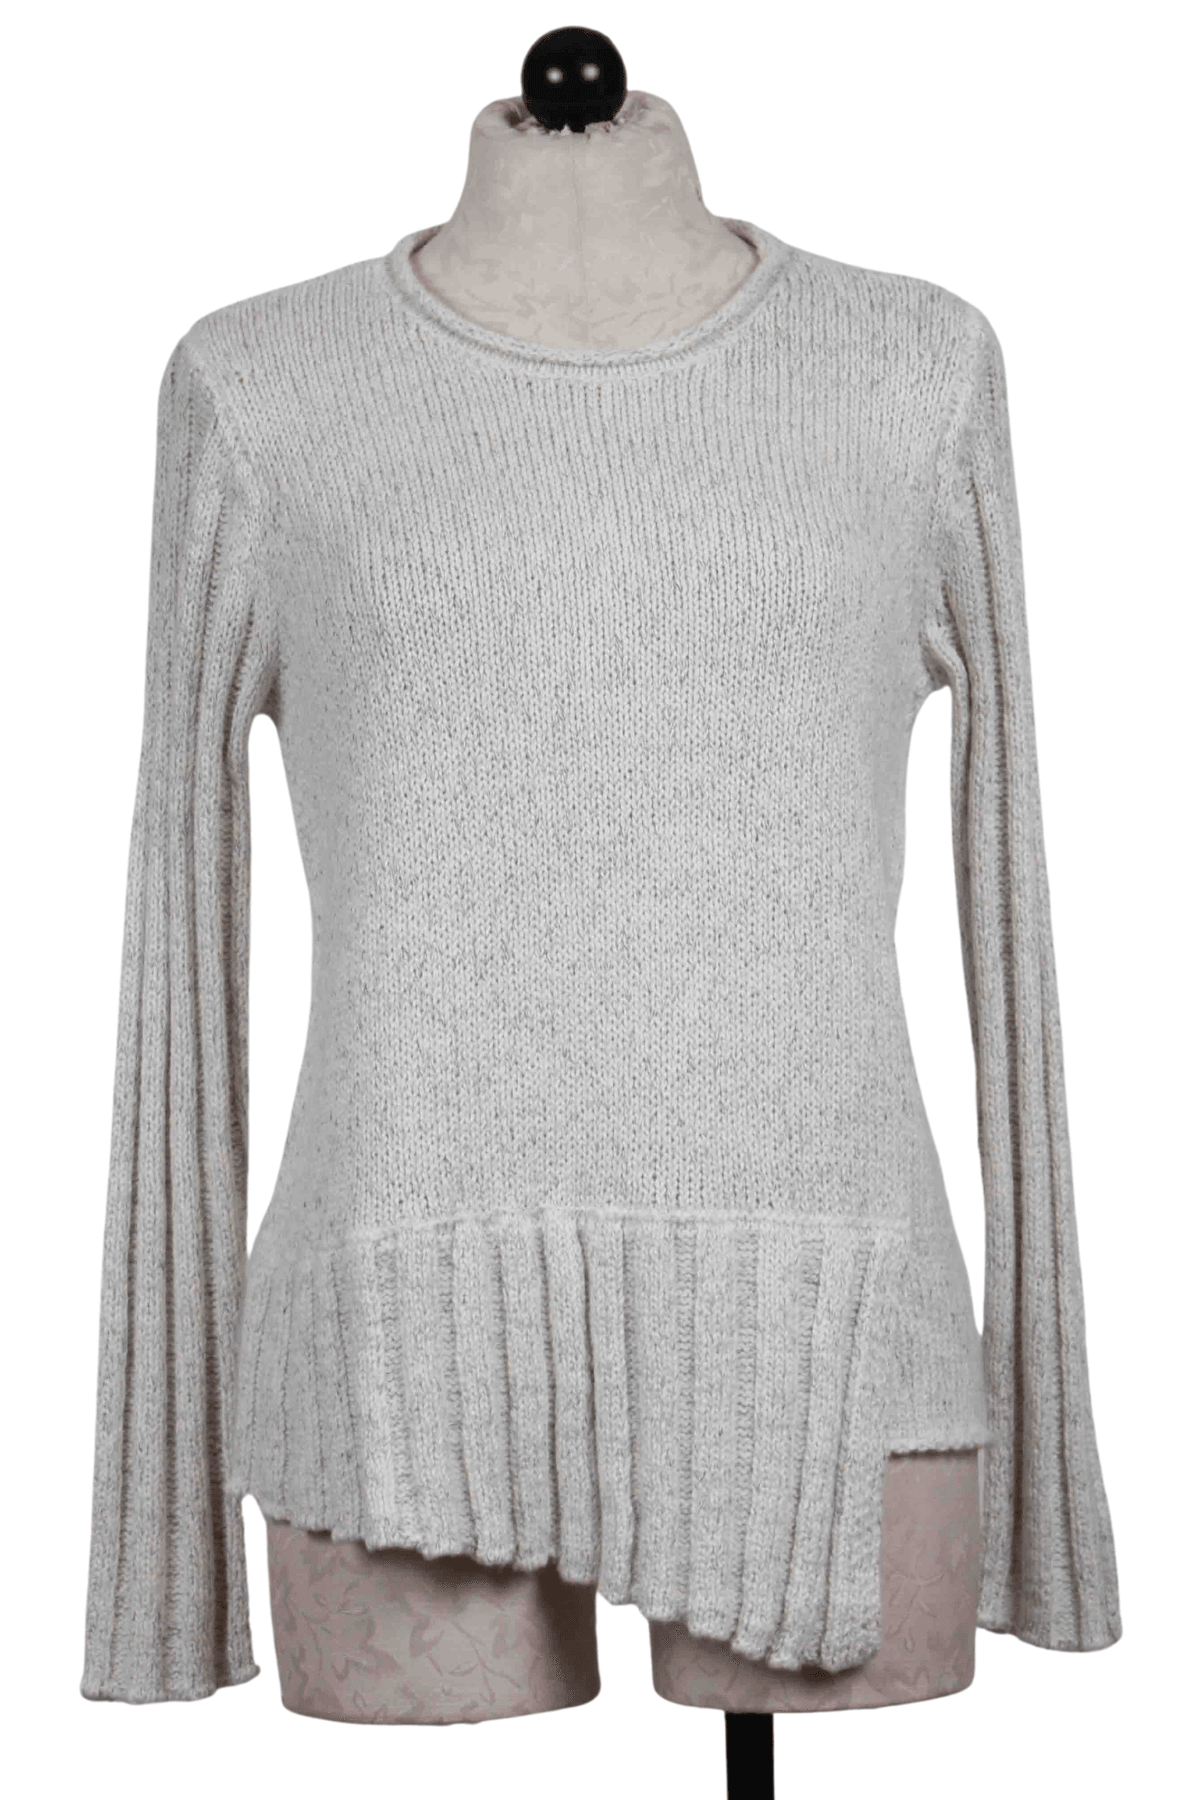 Snow Bunny Overlay Pullover by Liv by Habitat